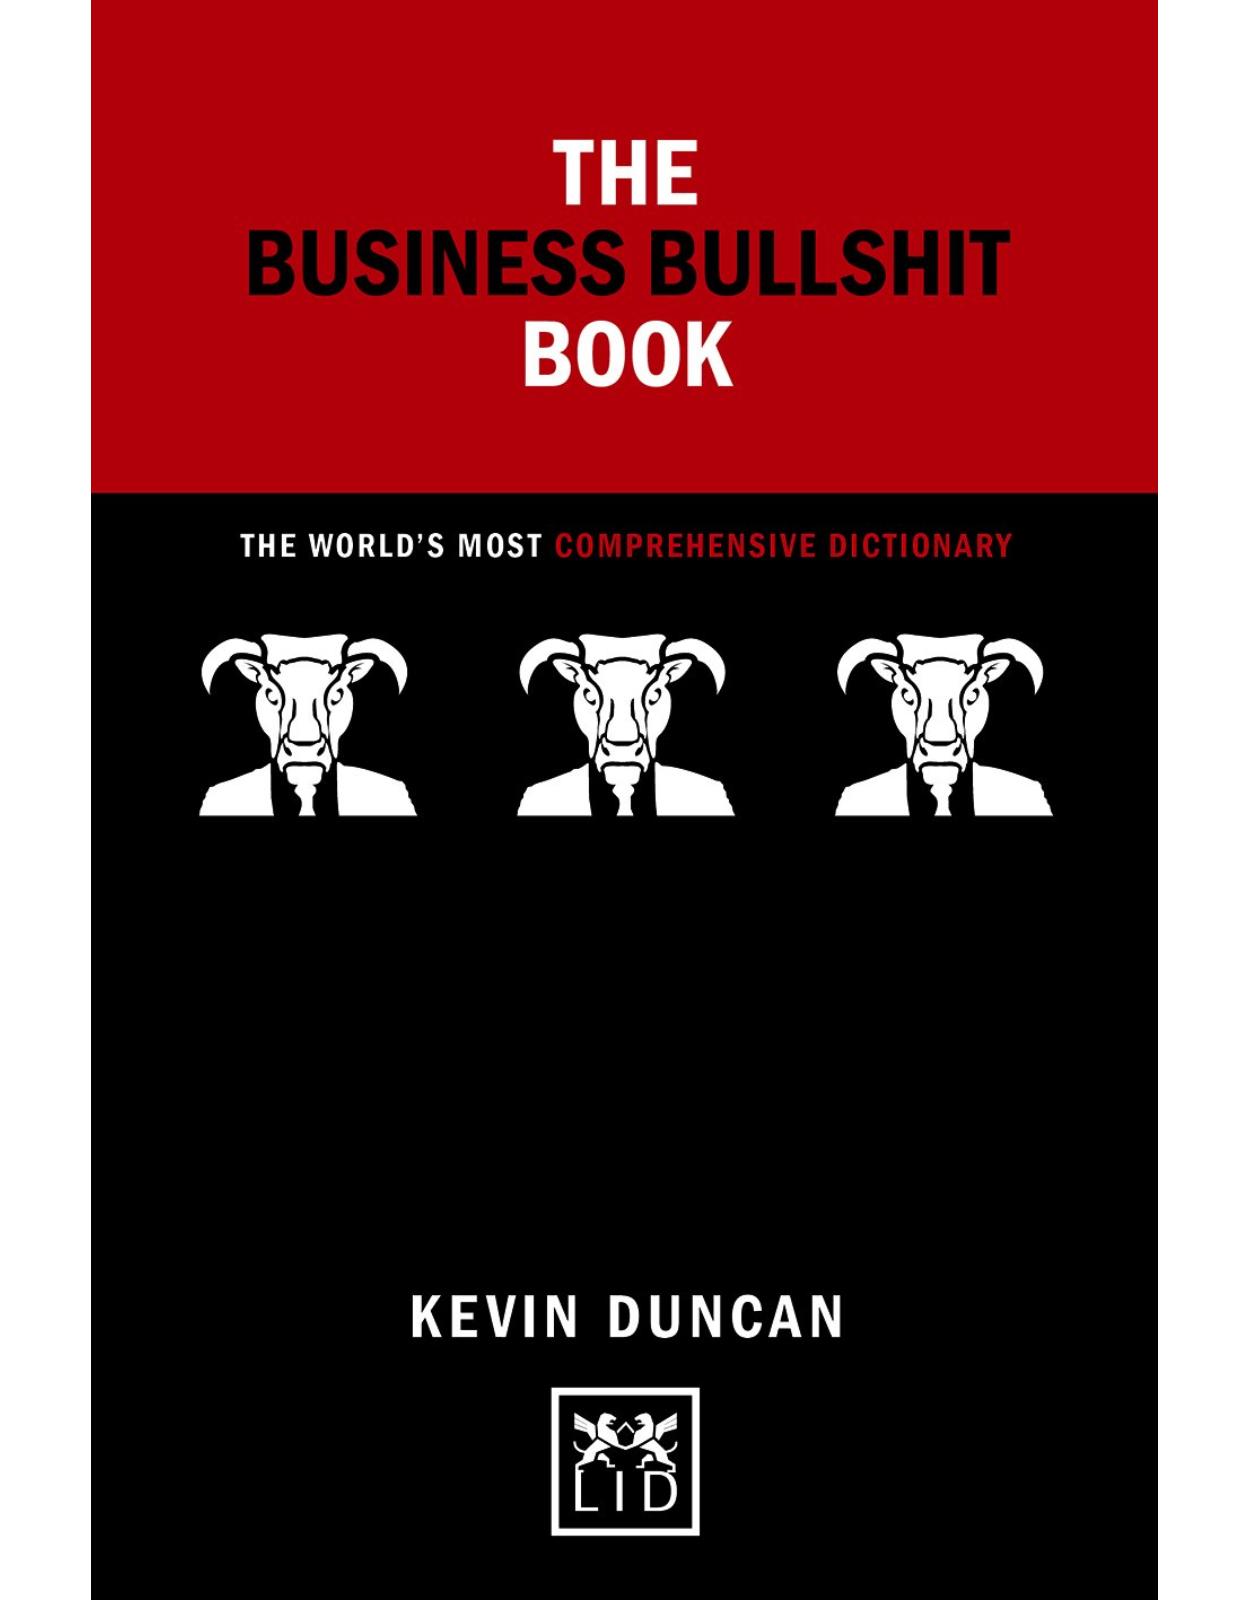 The Business Bullshit Book: A Dictionary for Navigating the Jungle of Corporate Speak 2016